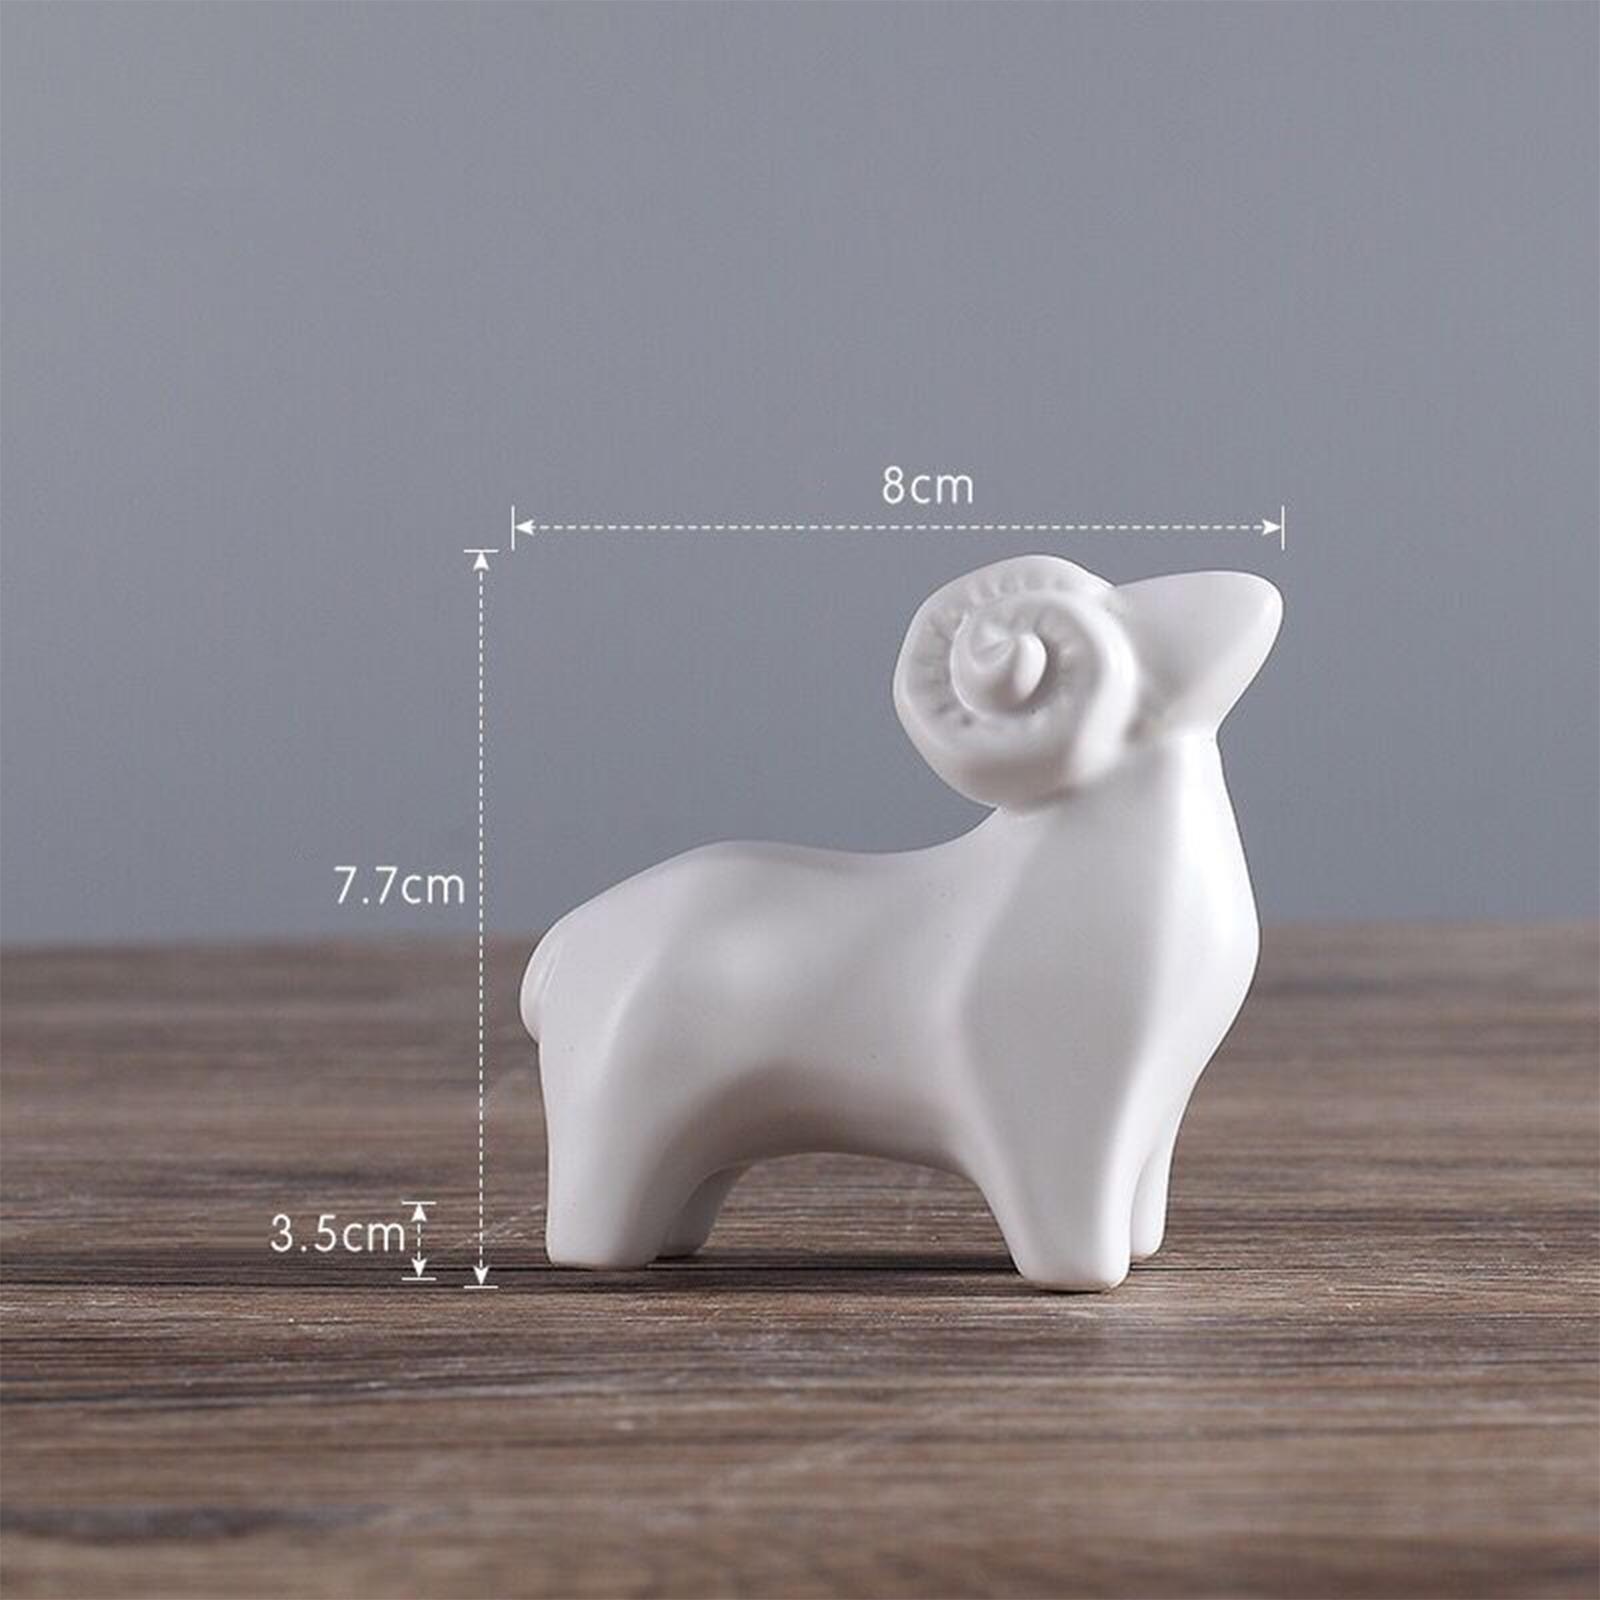 Creative Sheep Statue, Porcelain Nordic Collectable Ornament Animal Figurine for Desktop Bedroom Shop Bookshelf Decoration White Small - image 3 of 8